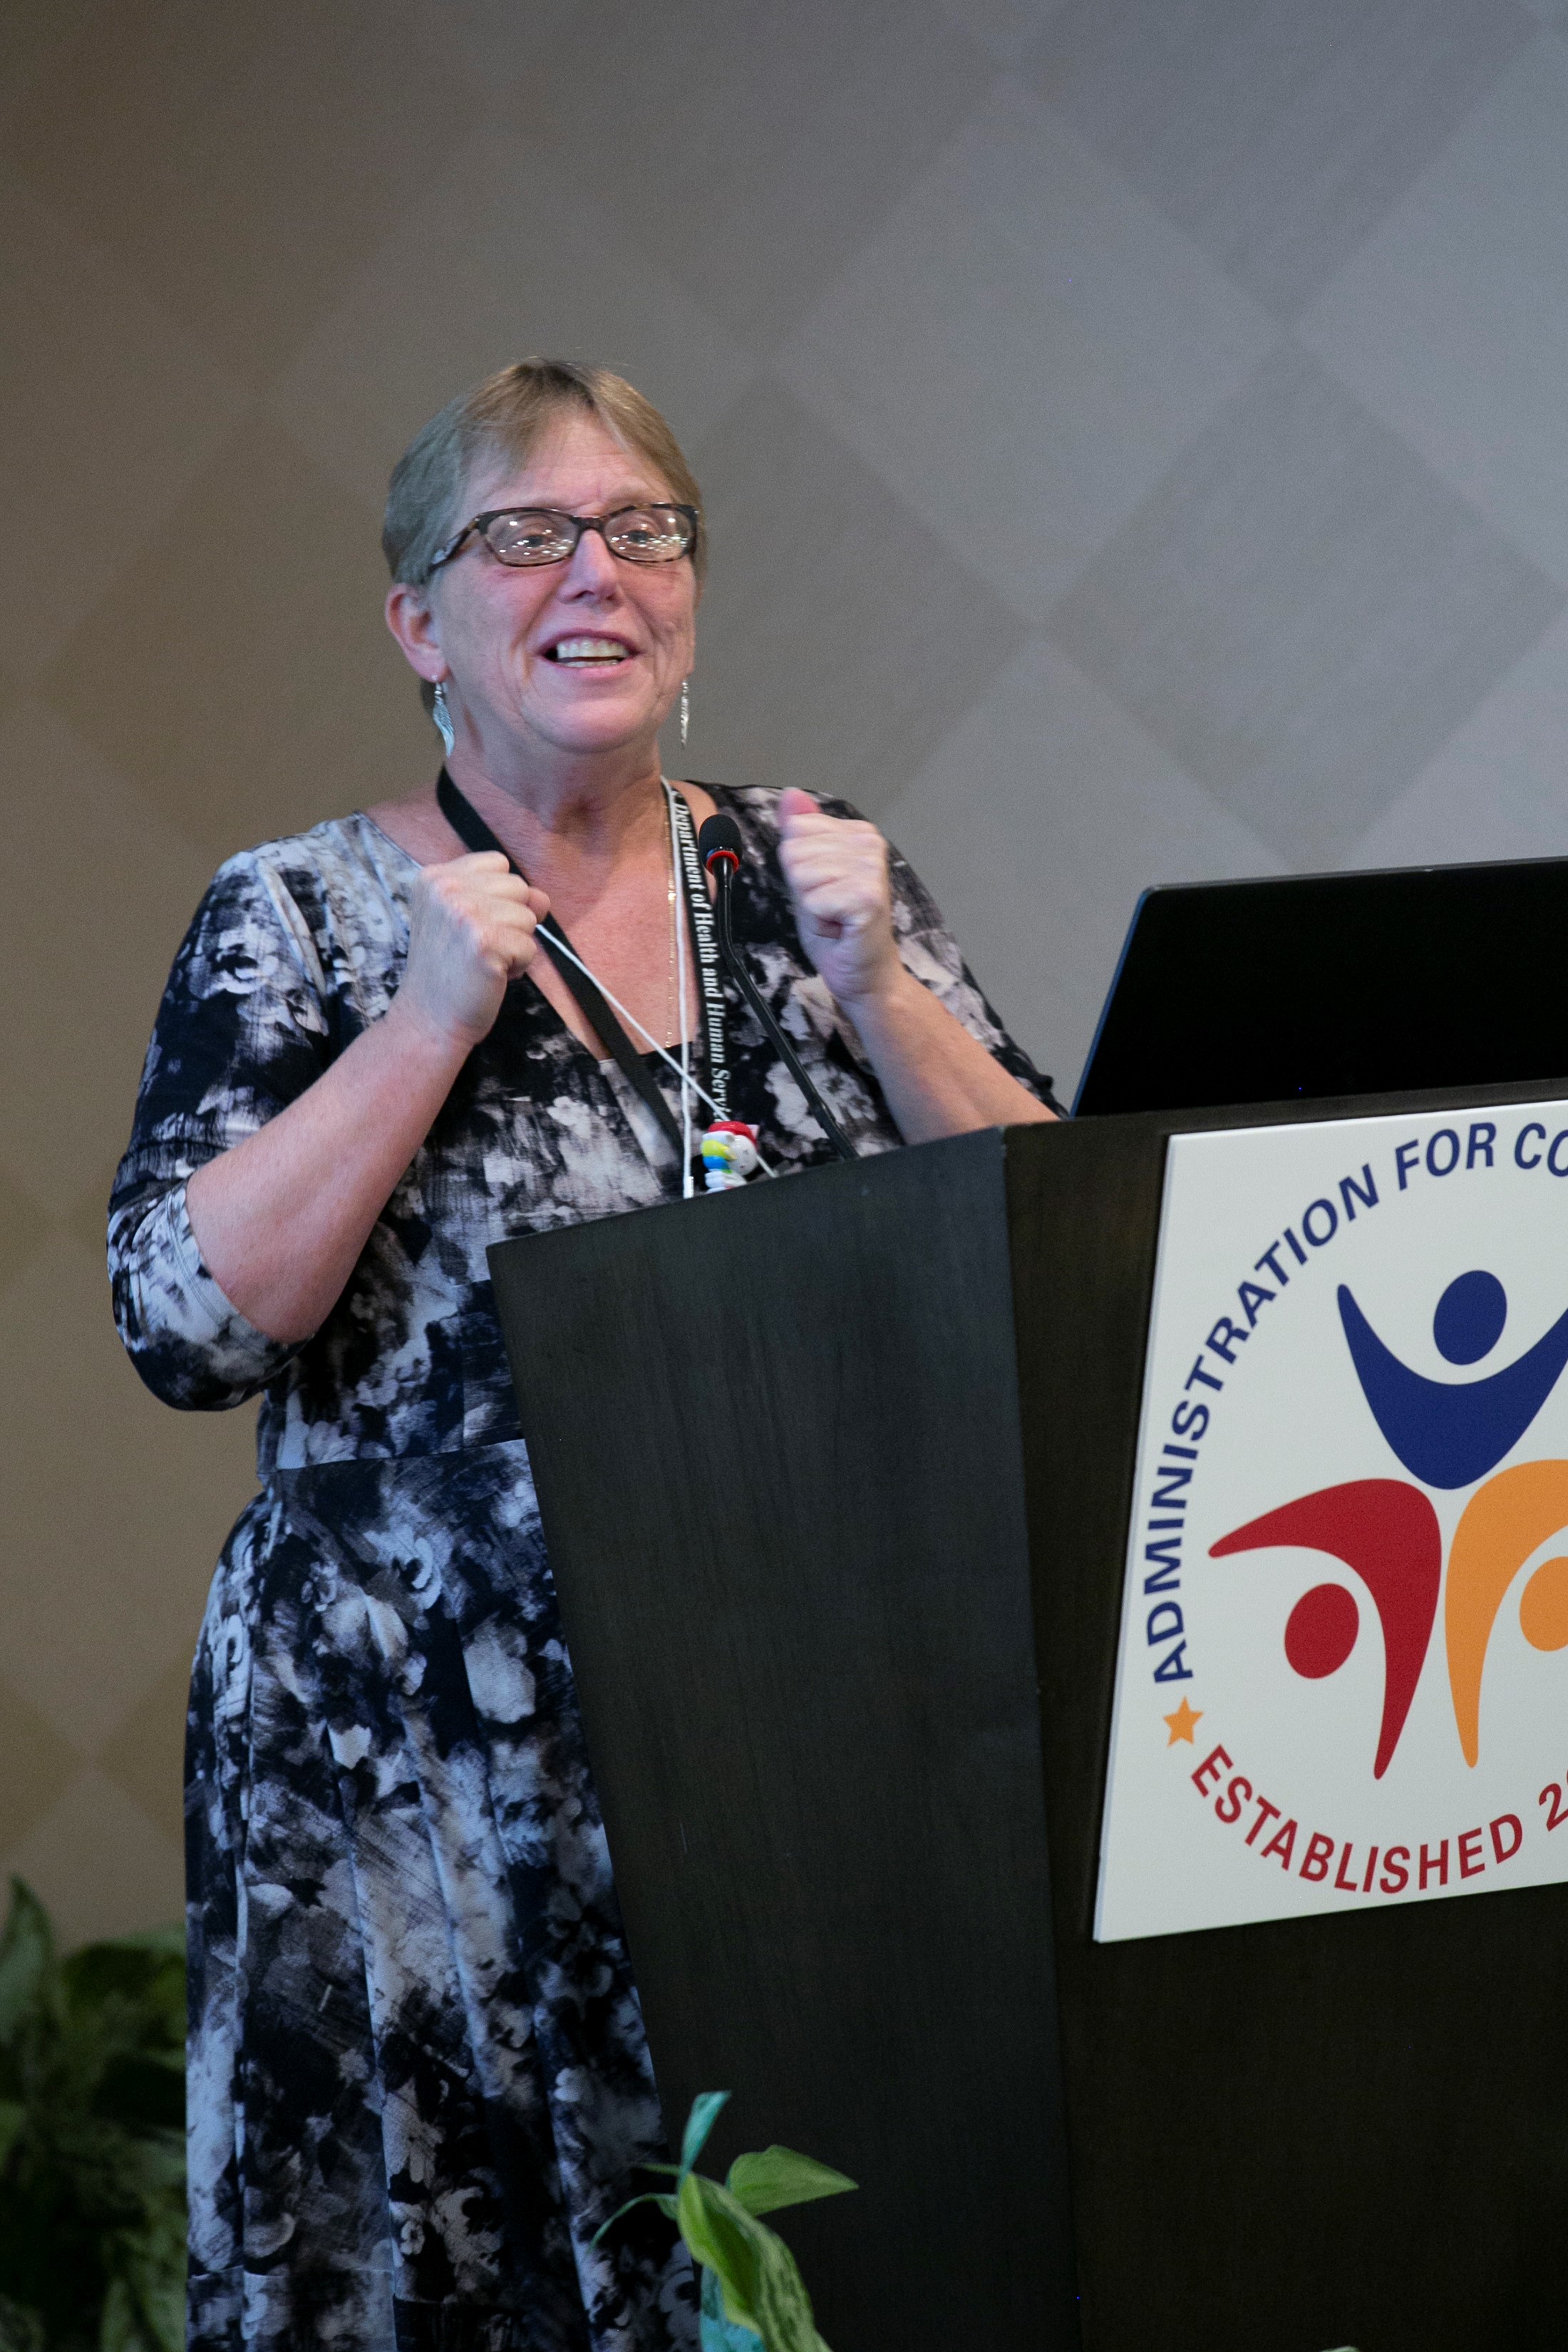 Lori Stalbaum, Administration for Community Living welcoming the RAISE Family Caregiving Advisory Council on August 28, 2019